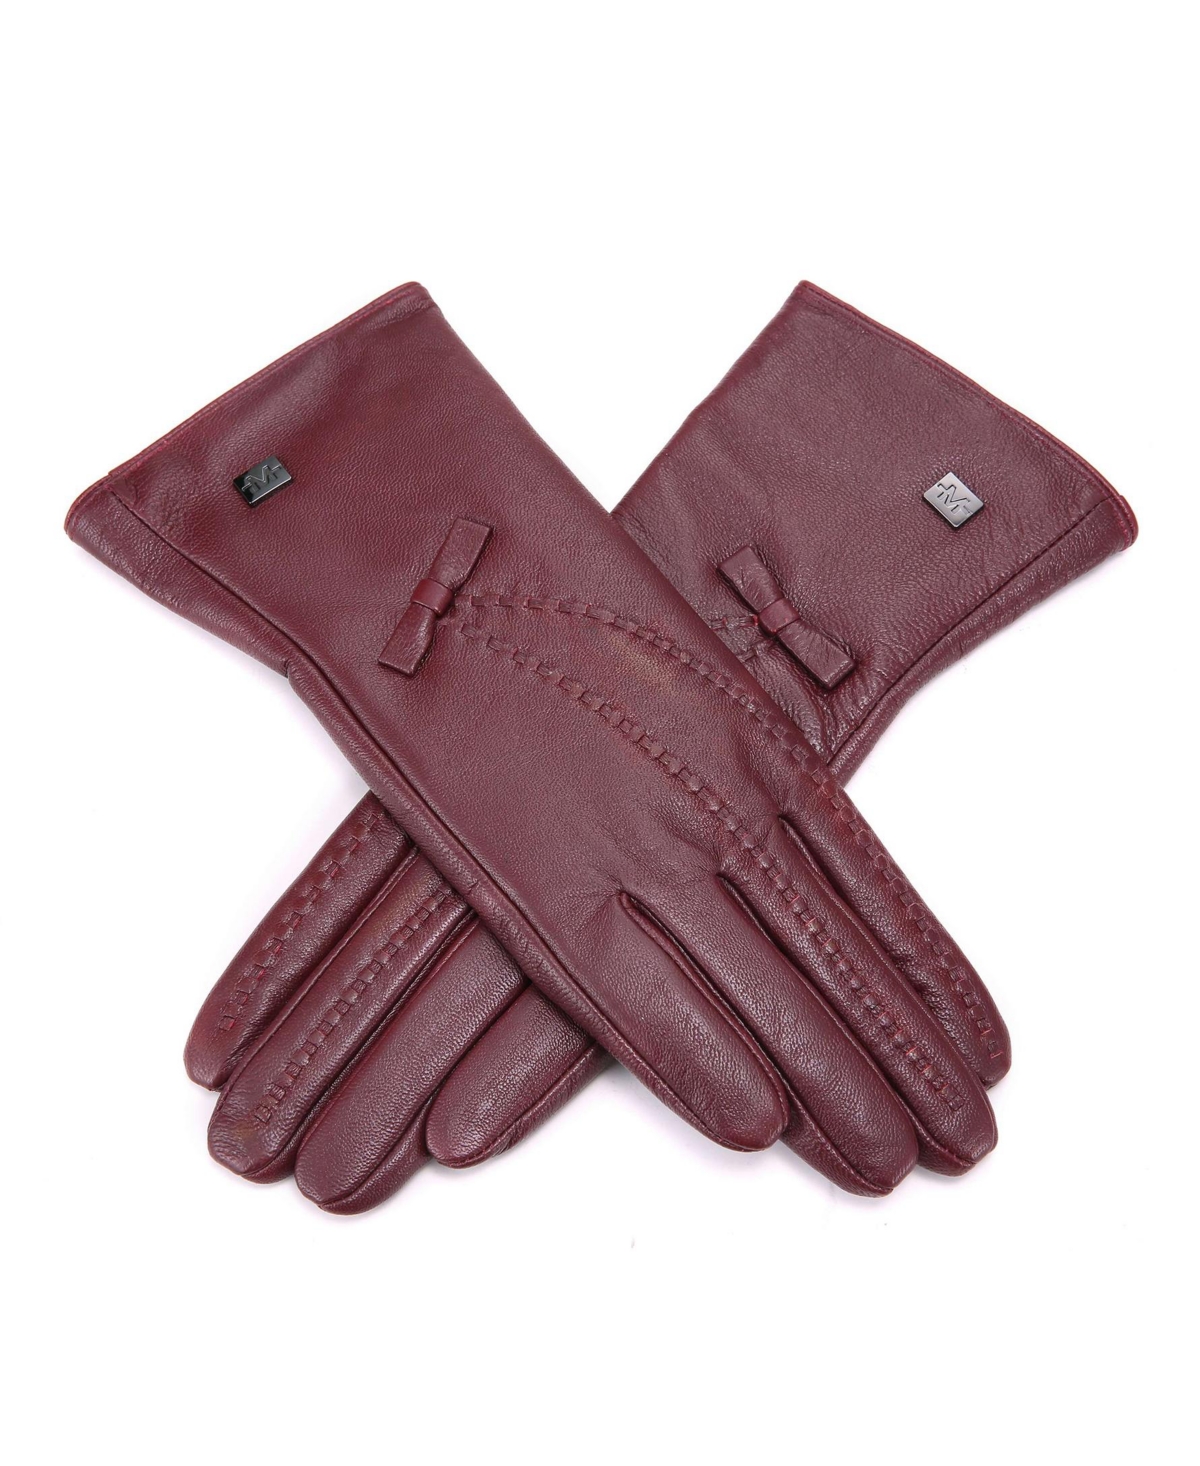 Women's Bow Design Waterproof Leather Gloves - Brown